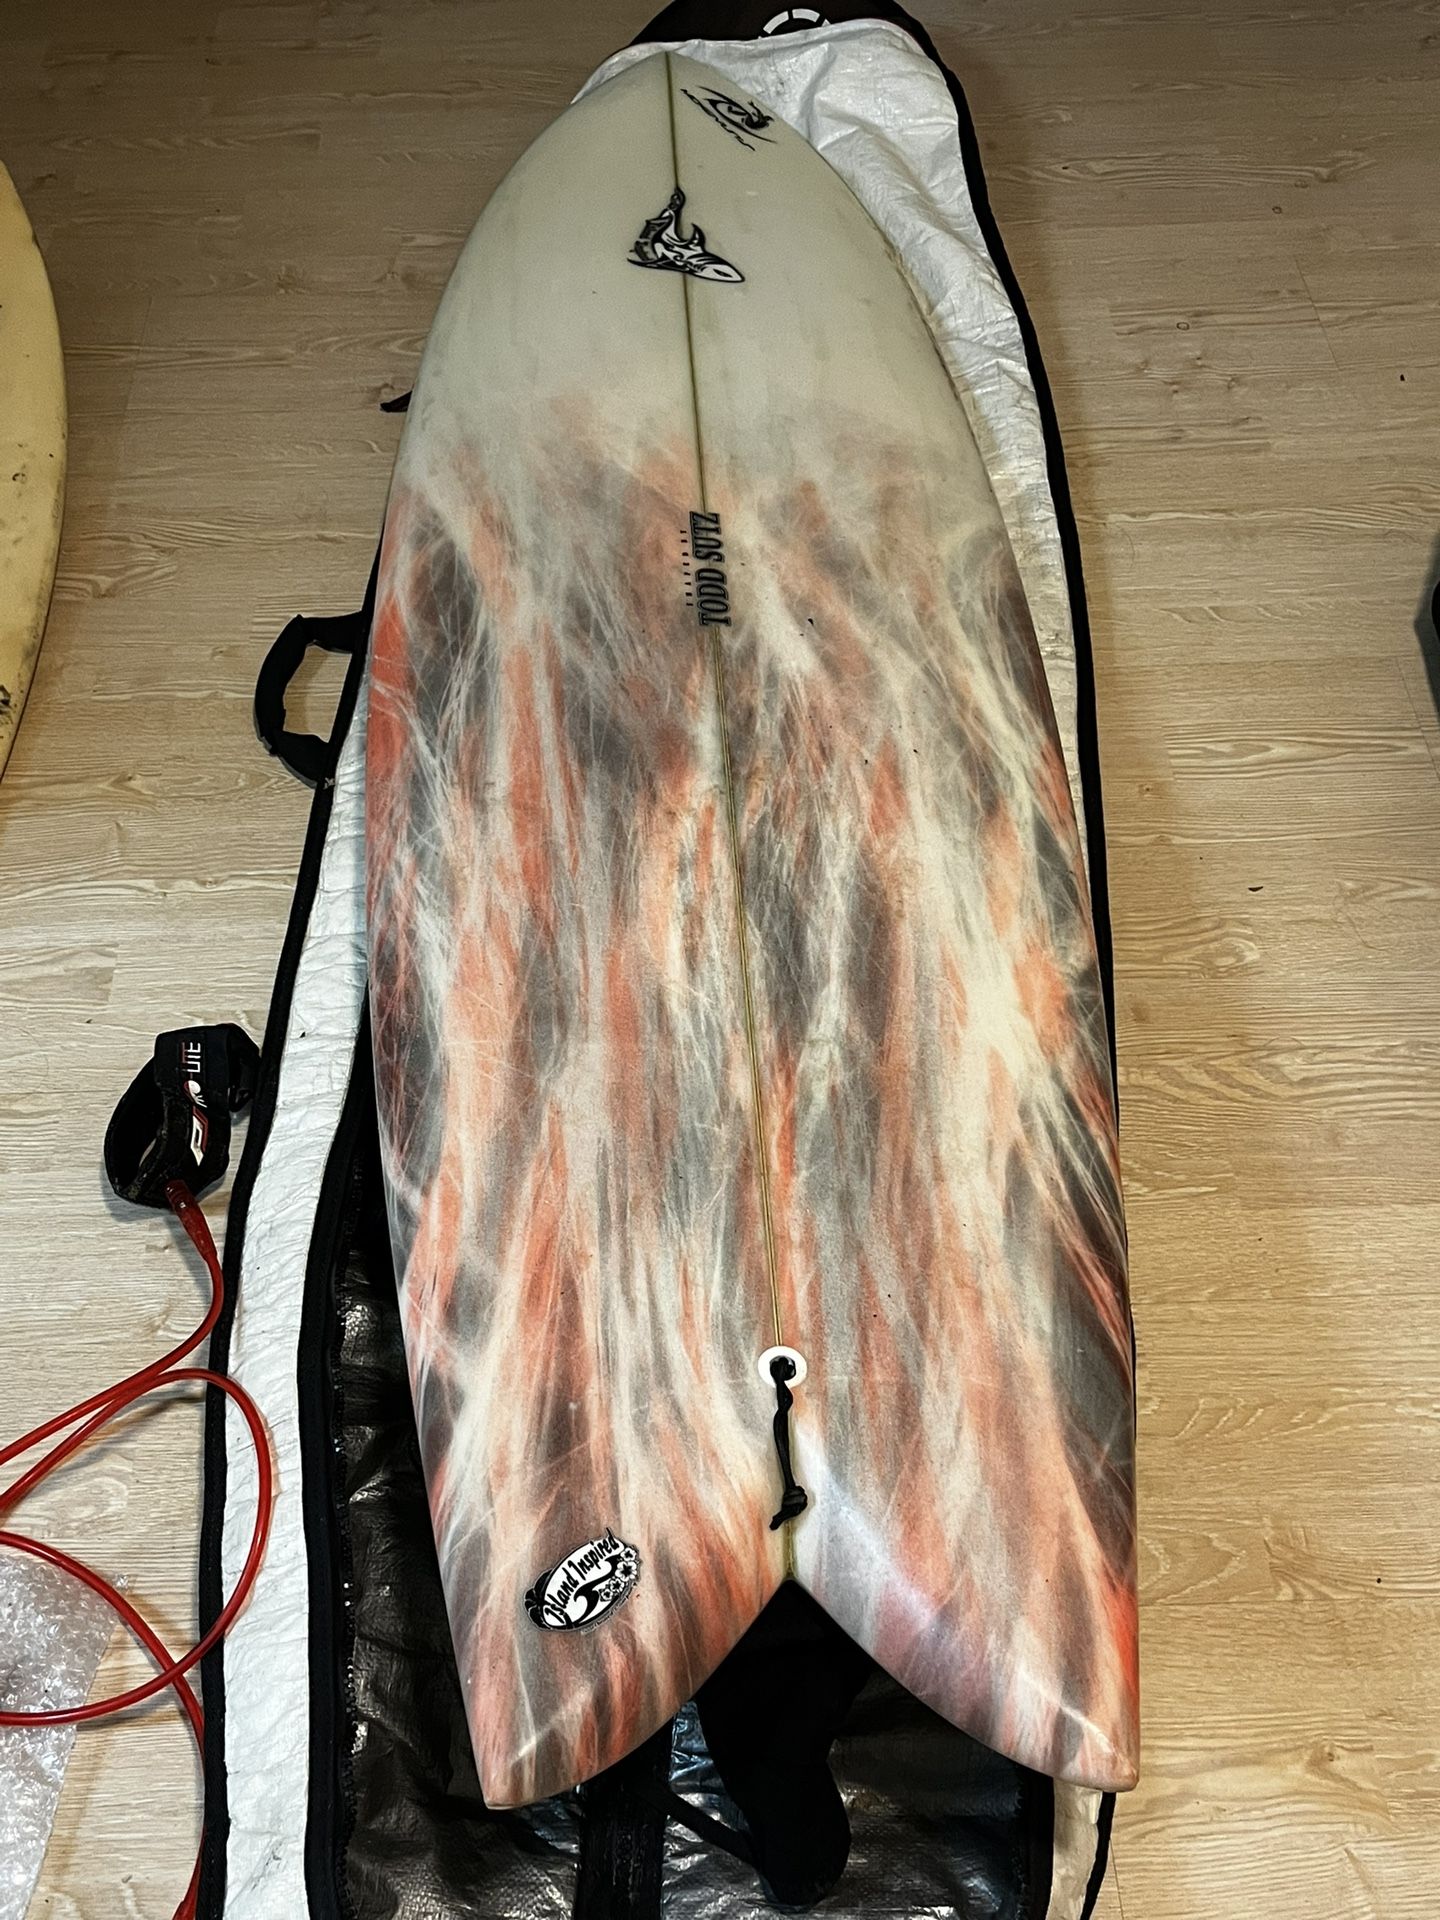 6'2 quad fish Todd Sutz shaped surfboard Man (Bag included)